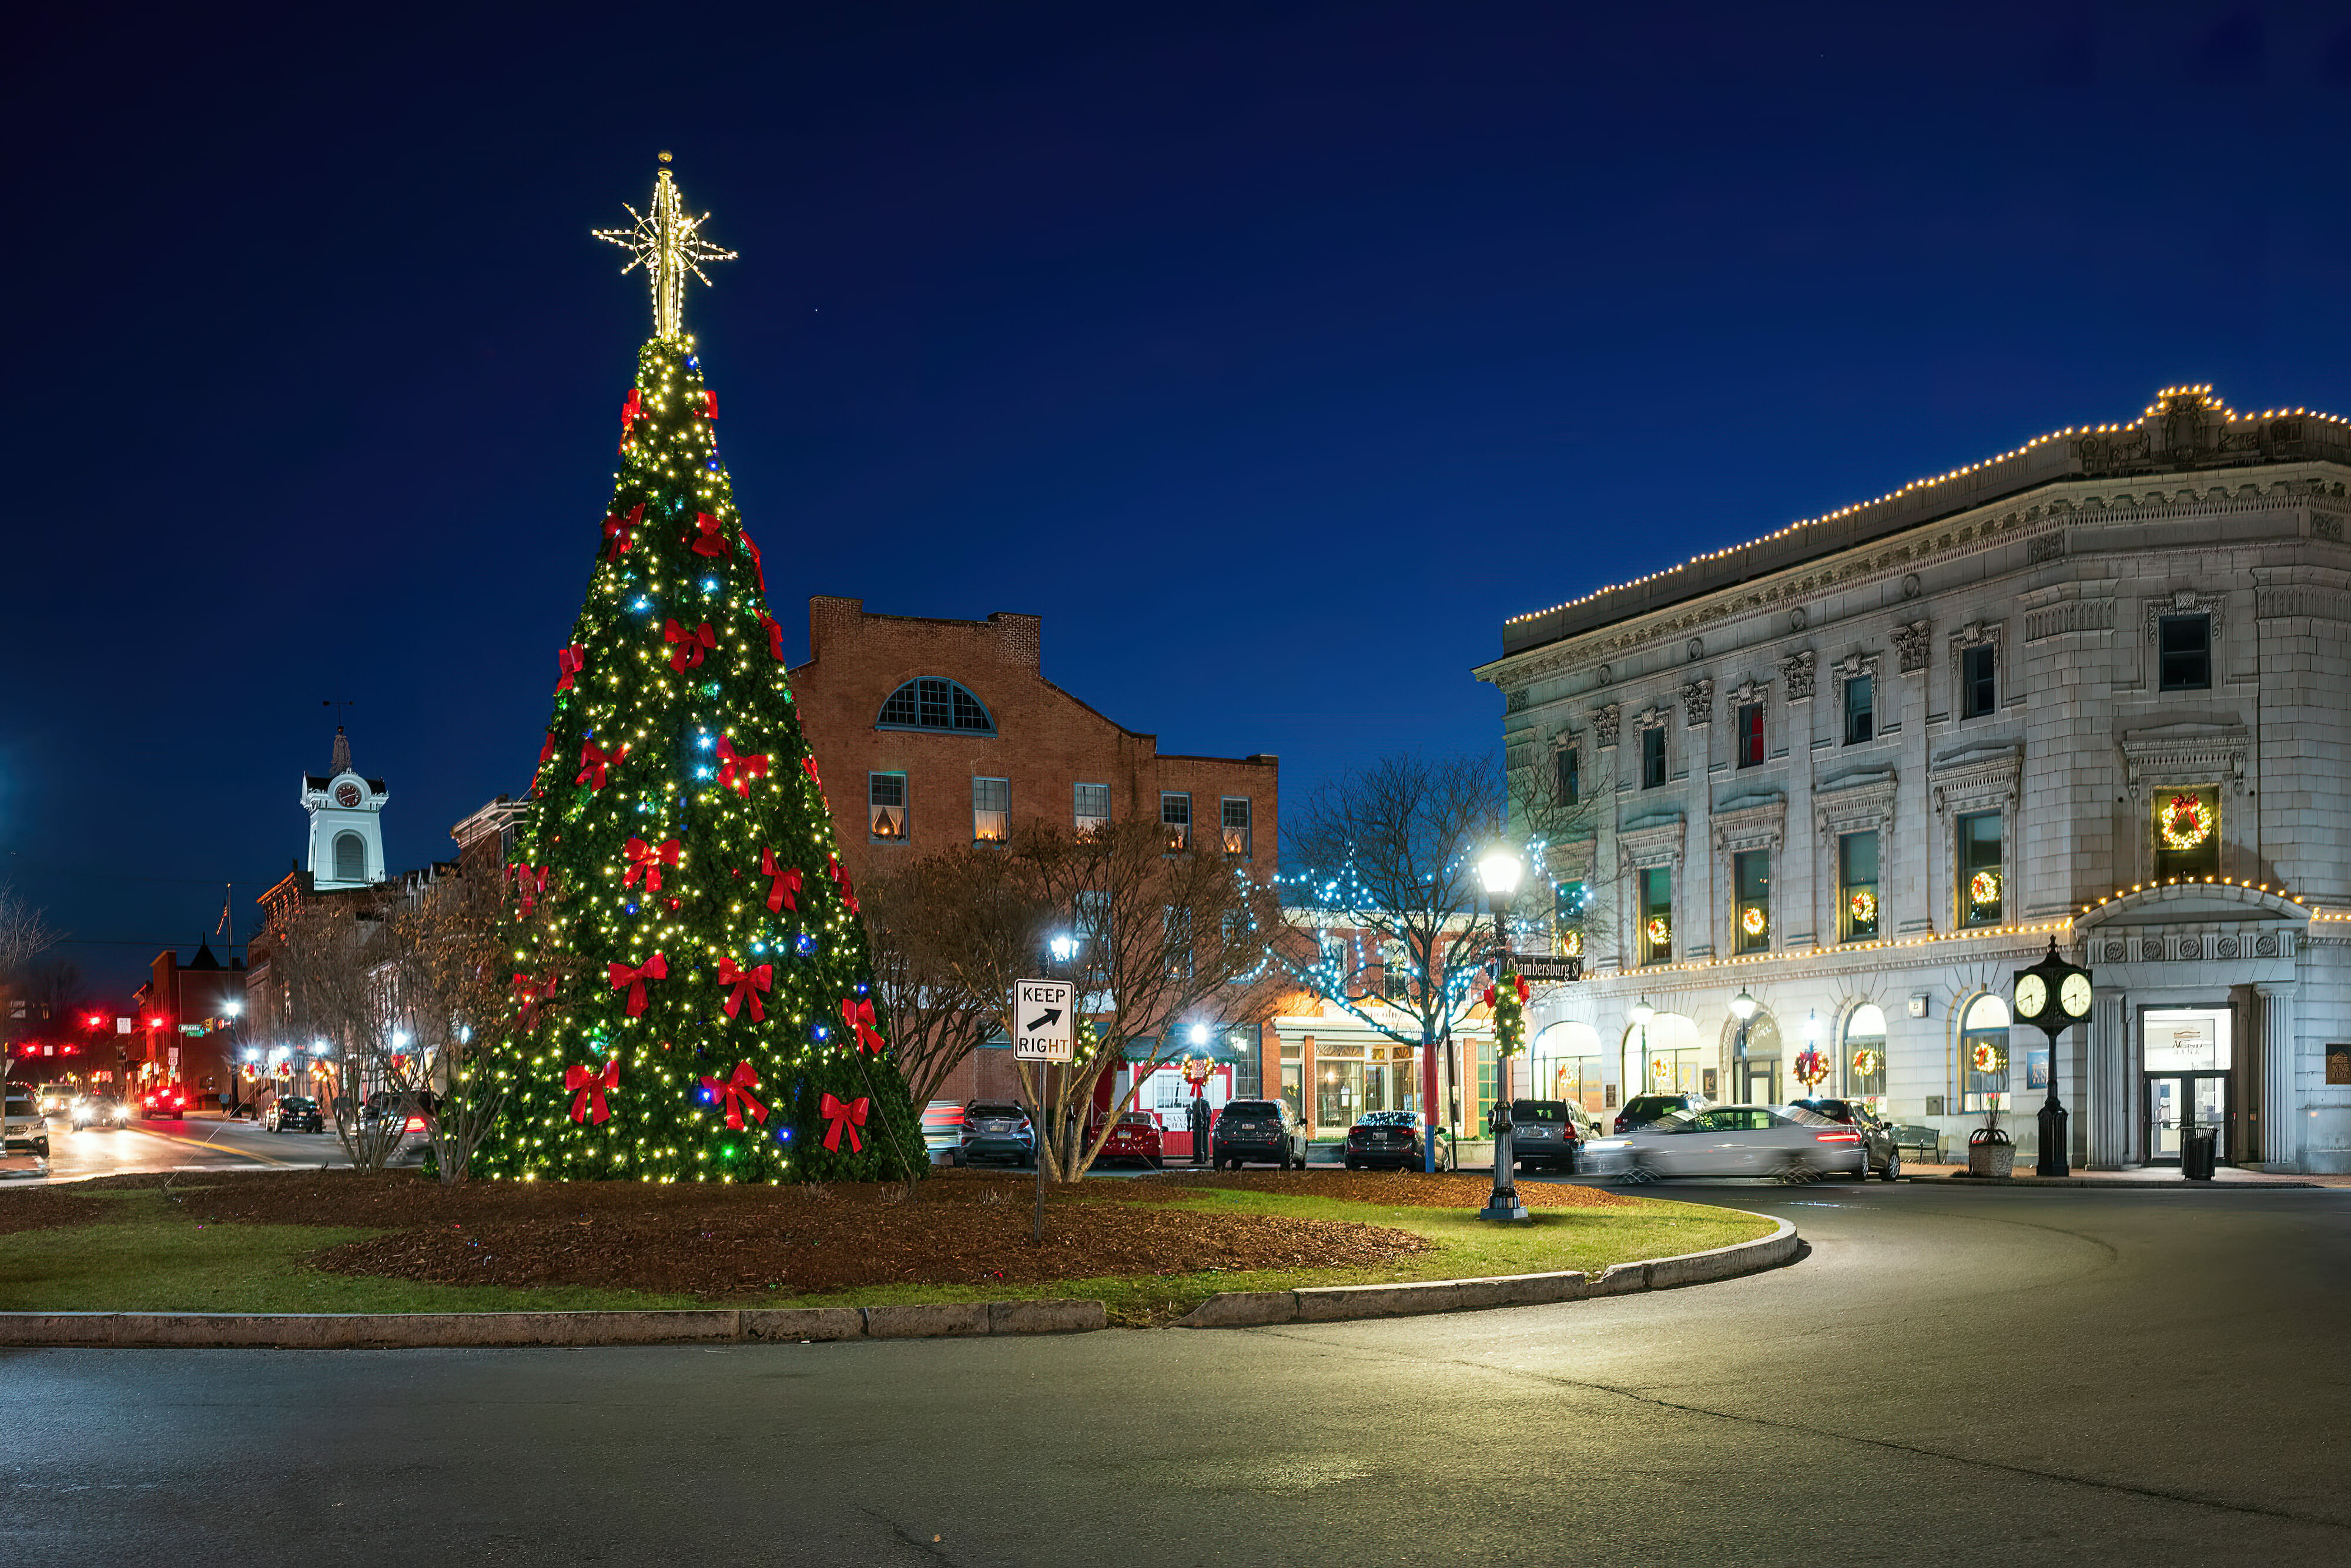 Historic town square with holiday tree lit up at night at Christmas, Gettysburg, Pennsylvania